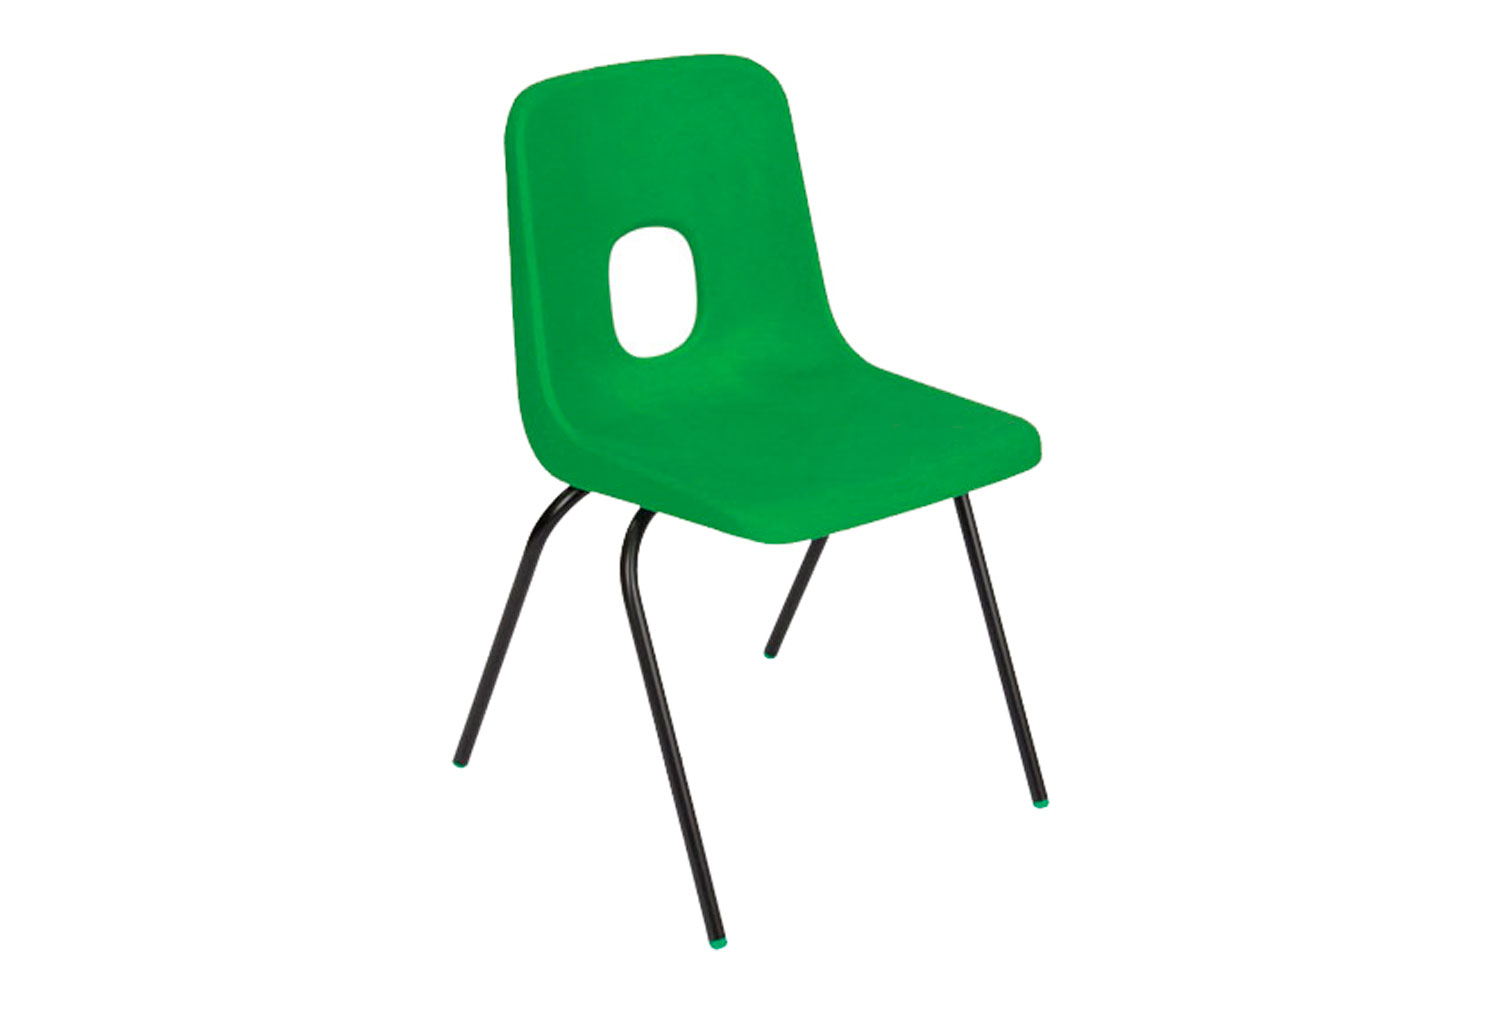 Qty 8 - Hille E Series Classroom Chair, 6-8 Years - 35wx31dx35h (cm), Black Frame, Green